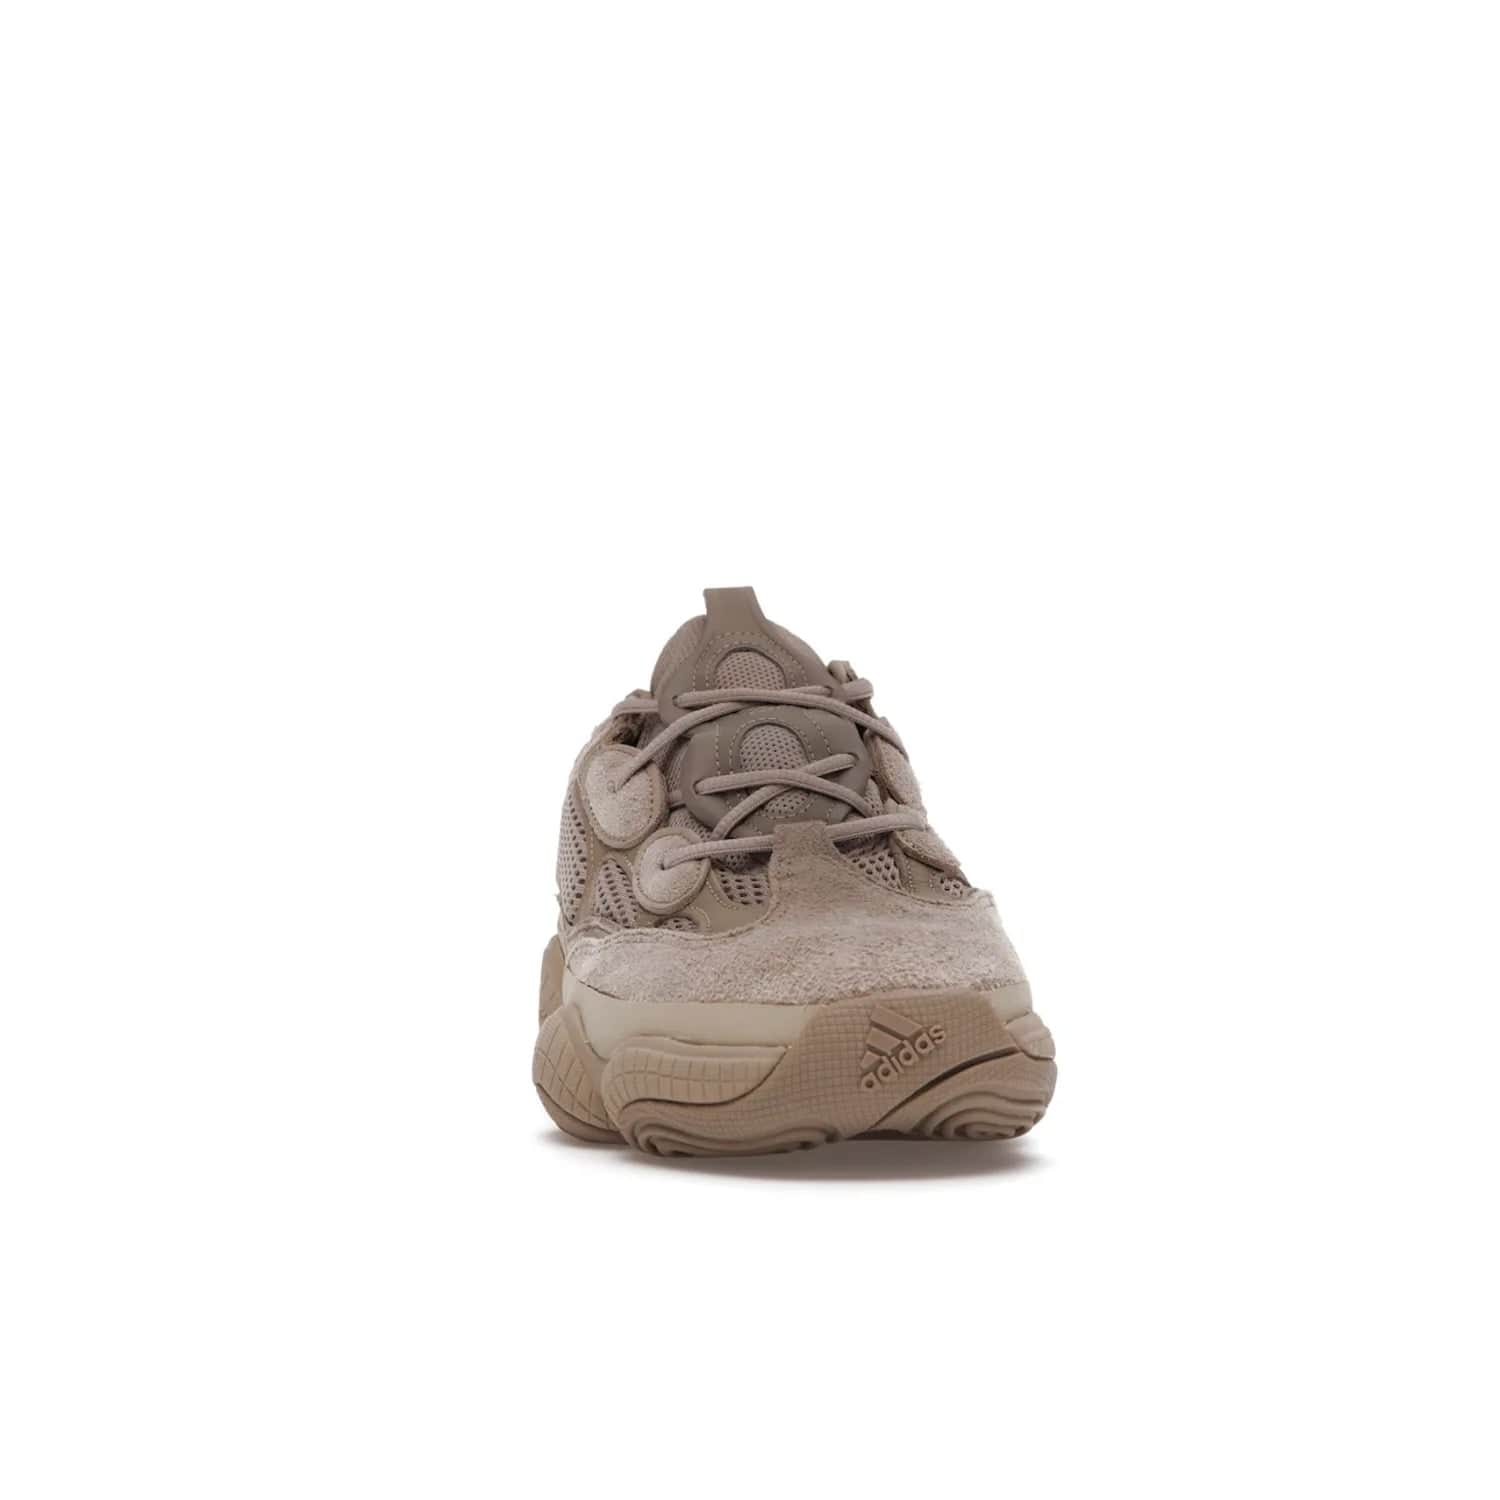 adidas Yeezy 500 Taupe Light - Image 9 - Only at www.BallersClubKickz.com - The adidas Yeezy 500 Taupe Light combines mesh, leather, and suede, with a durable adiPRENE sole for an eye-catching accessory. Reflective piping adds the perfect finishing touches to this unique silhouette. Ideal for any wardrobe, releasing in June 2021.